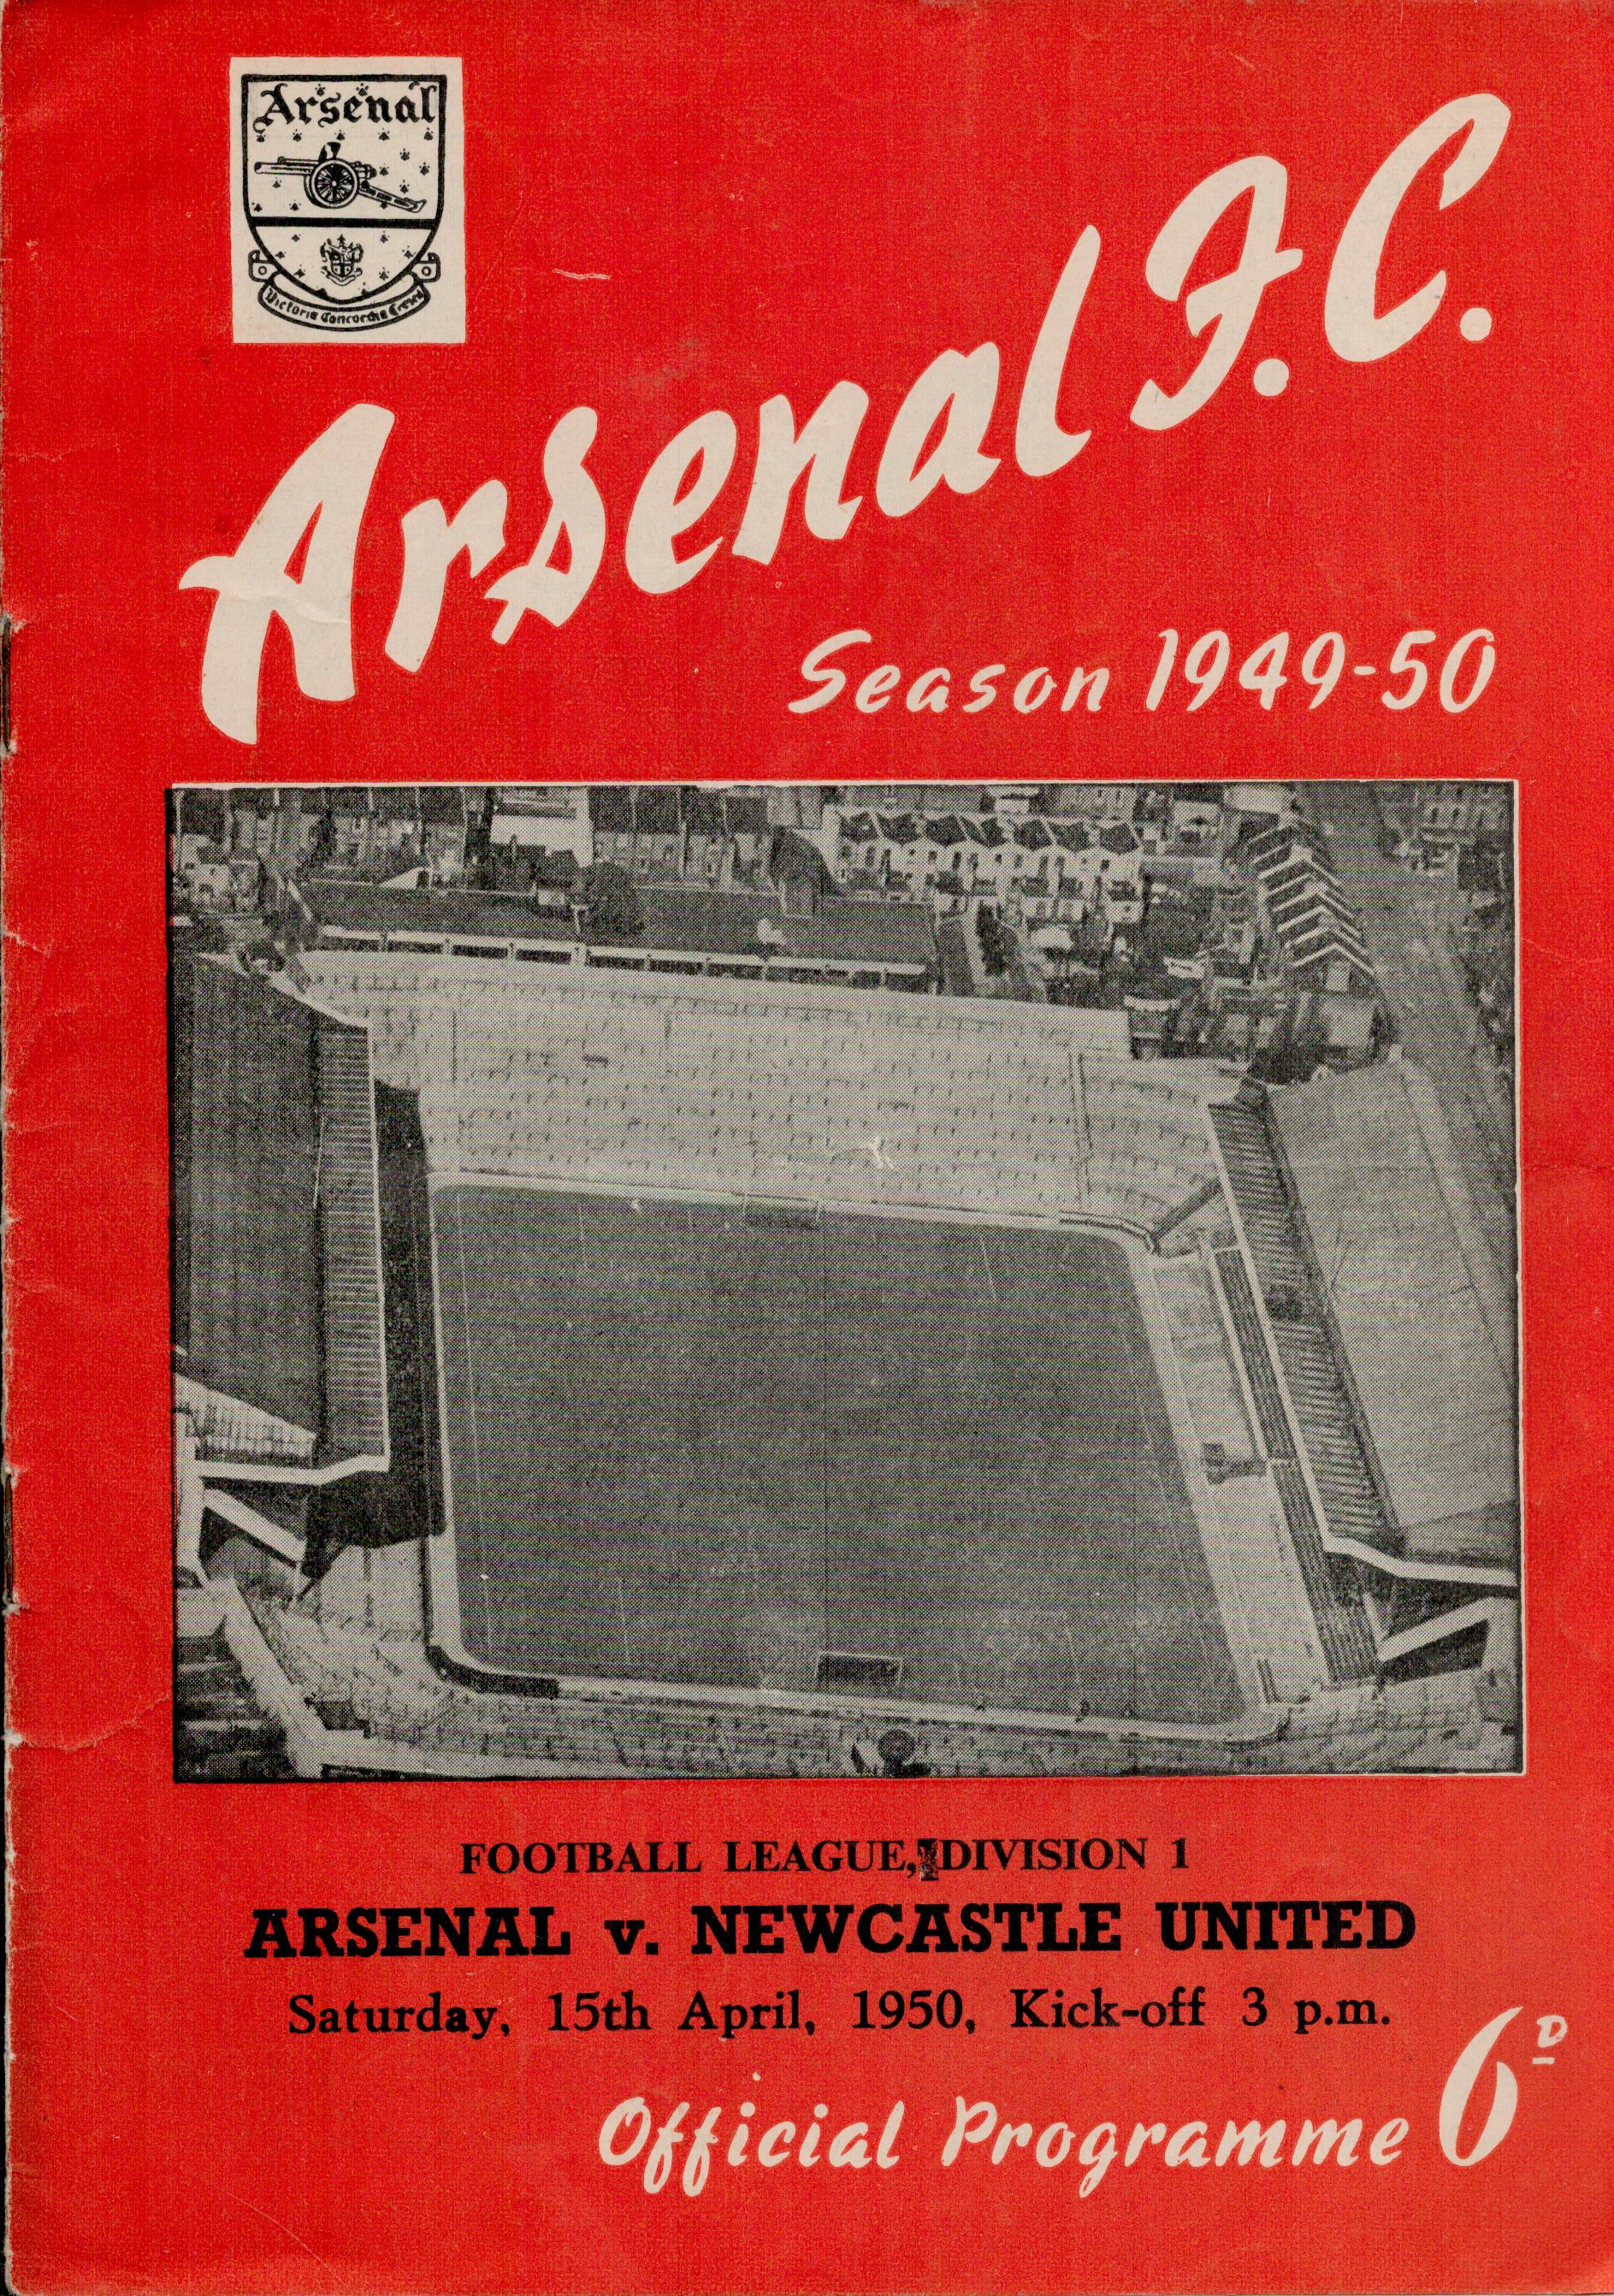 Arsenal FC Collection of 4 Matchday Programmes and 20 The Arsenal History pamphlets. Good condition. - Image 25 of 25